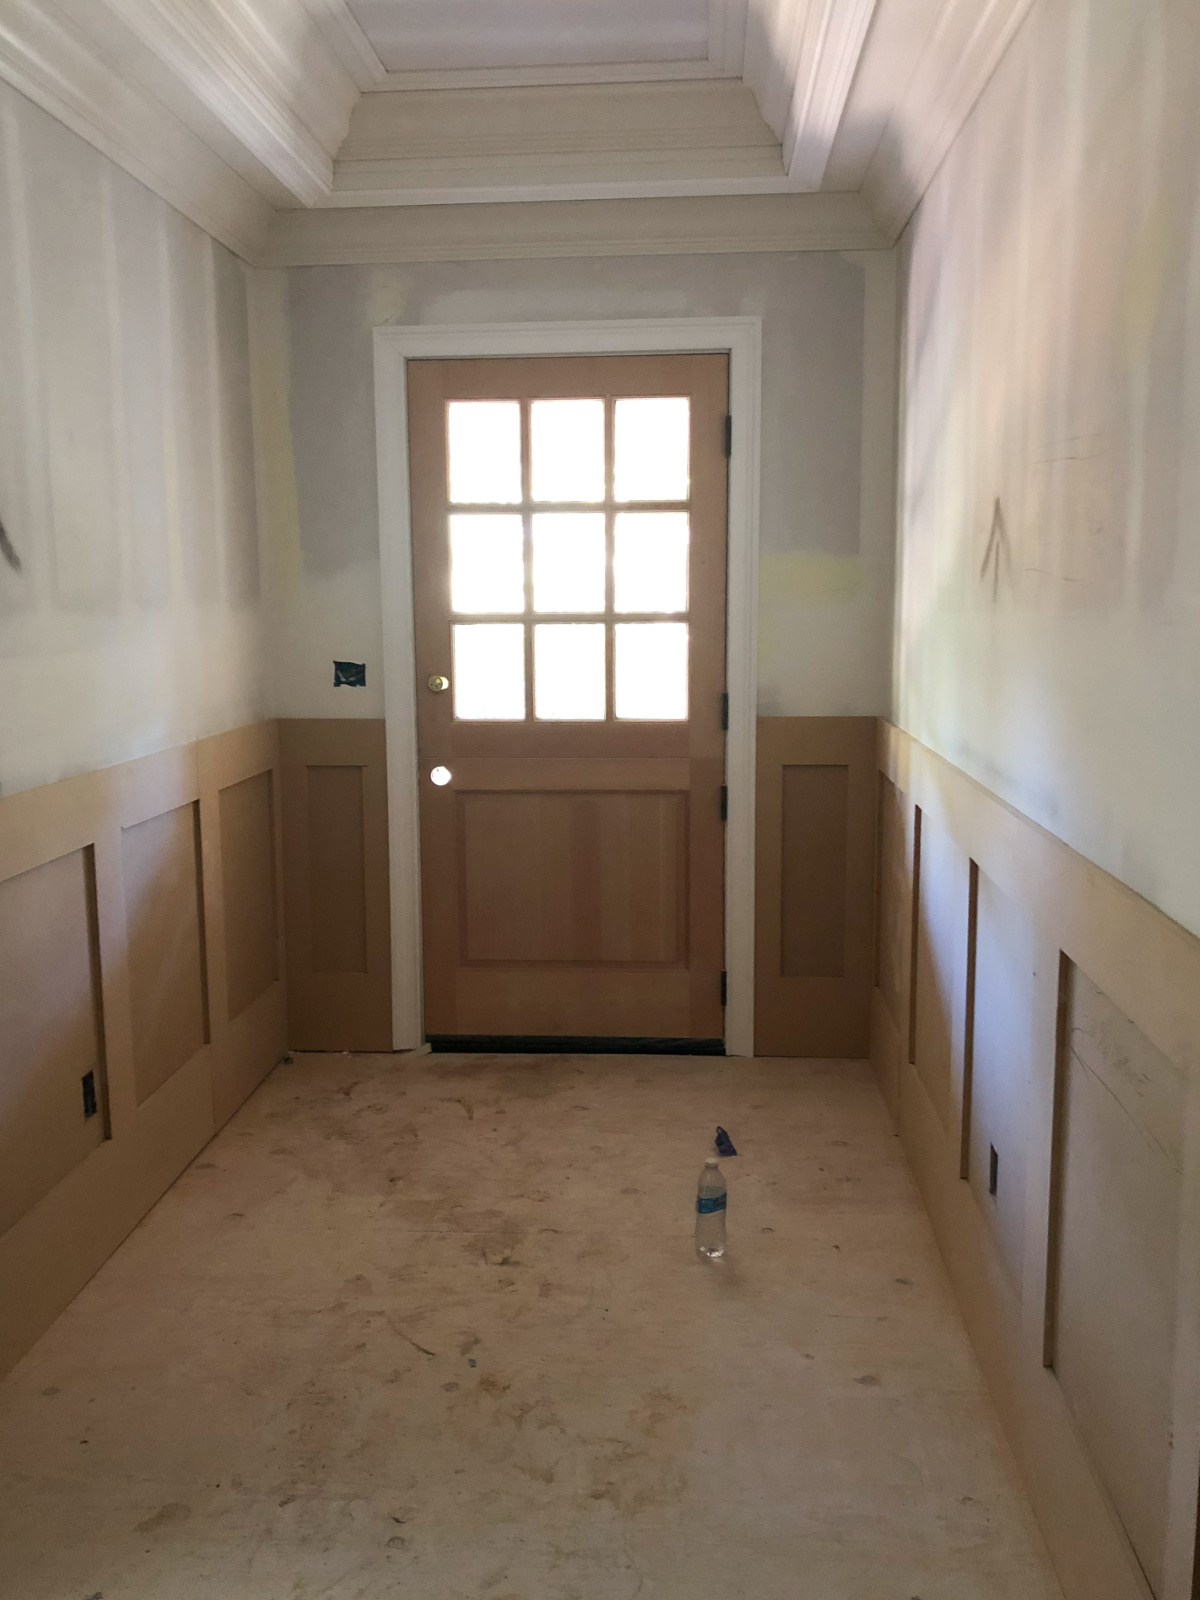 Small Foyer in midst of renovation.